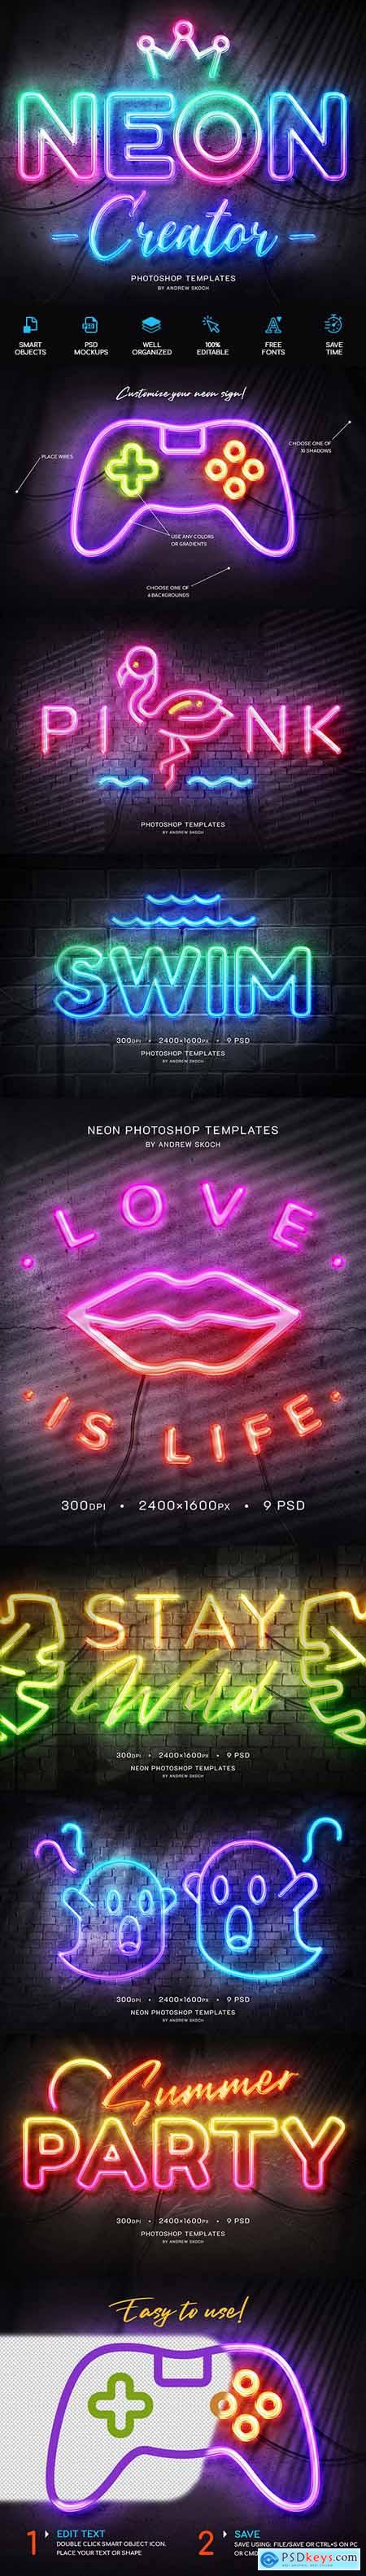 Neon Wall Sign Templates 27858499